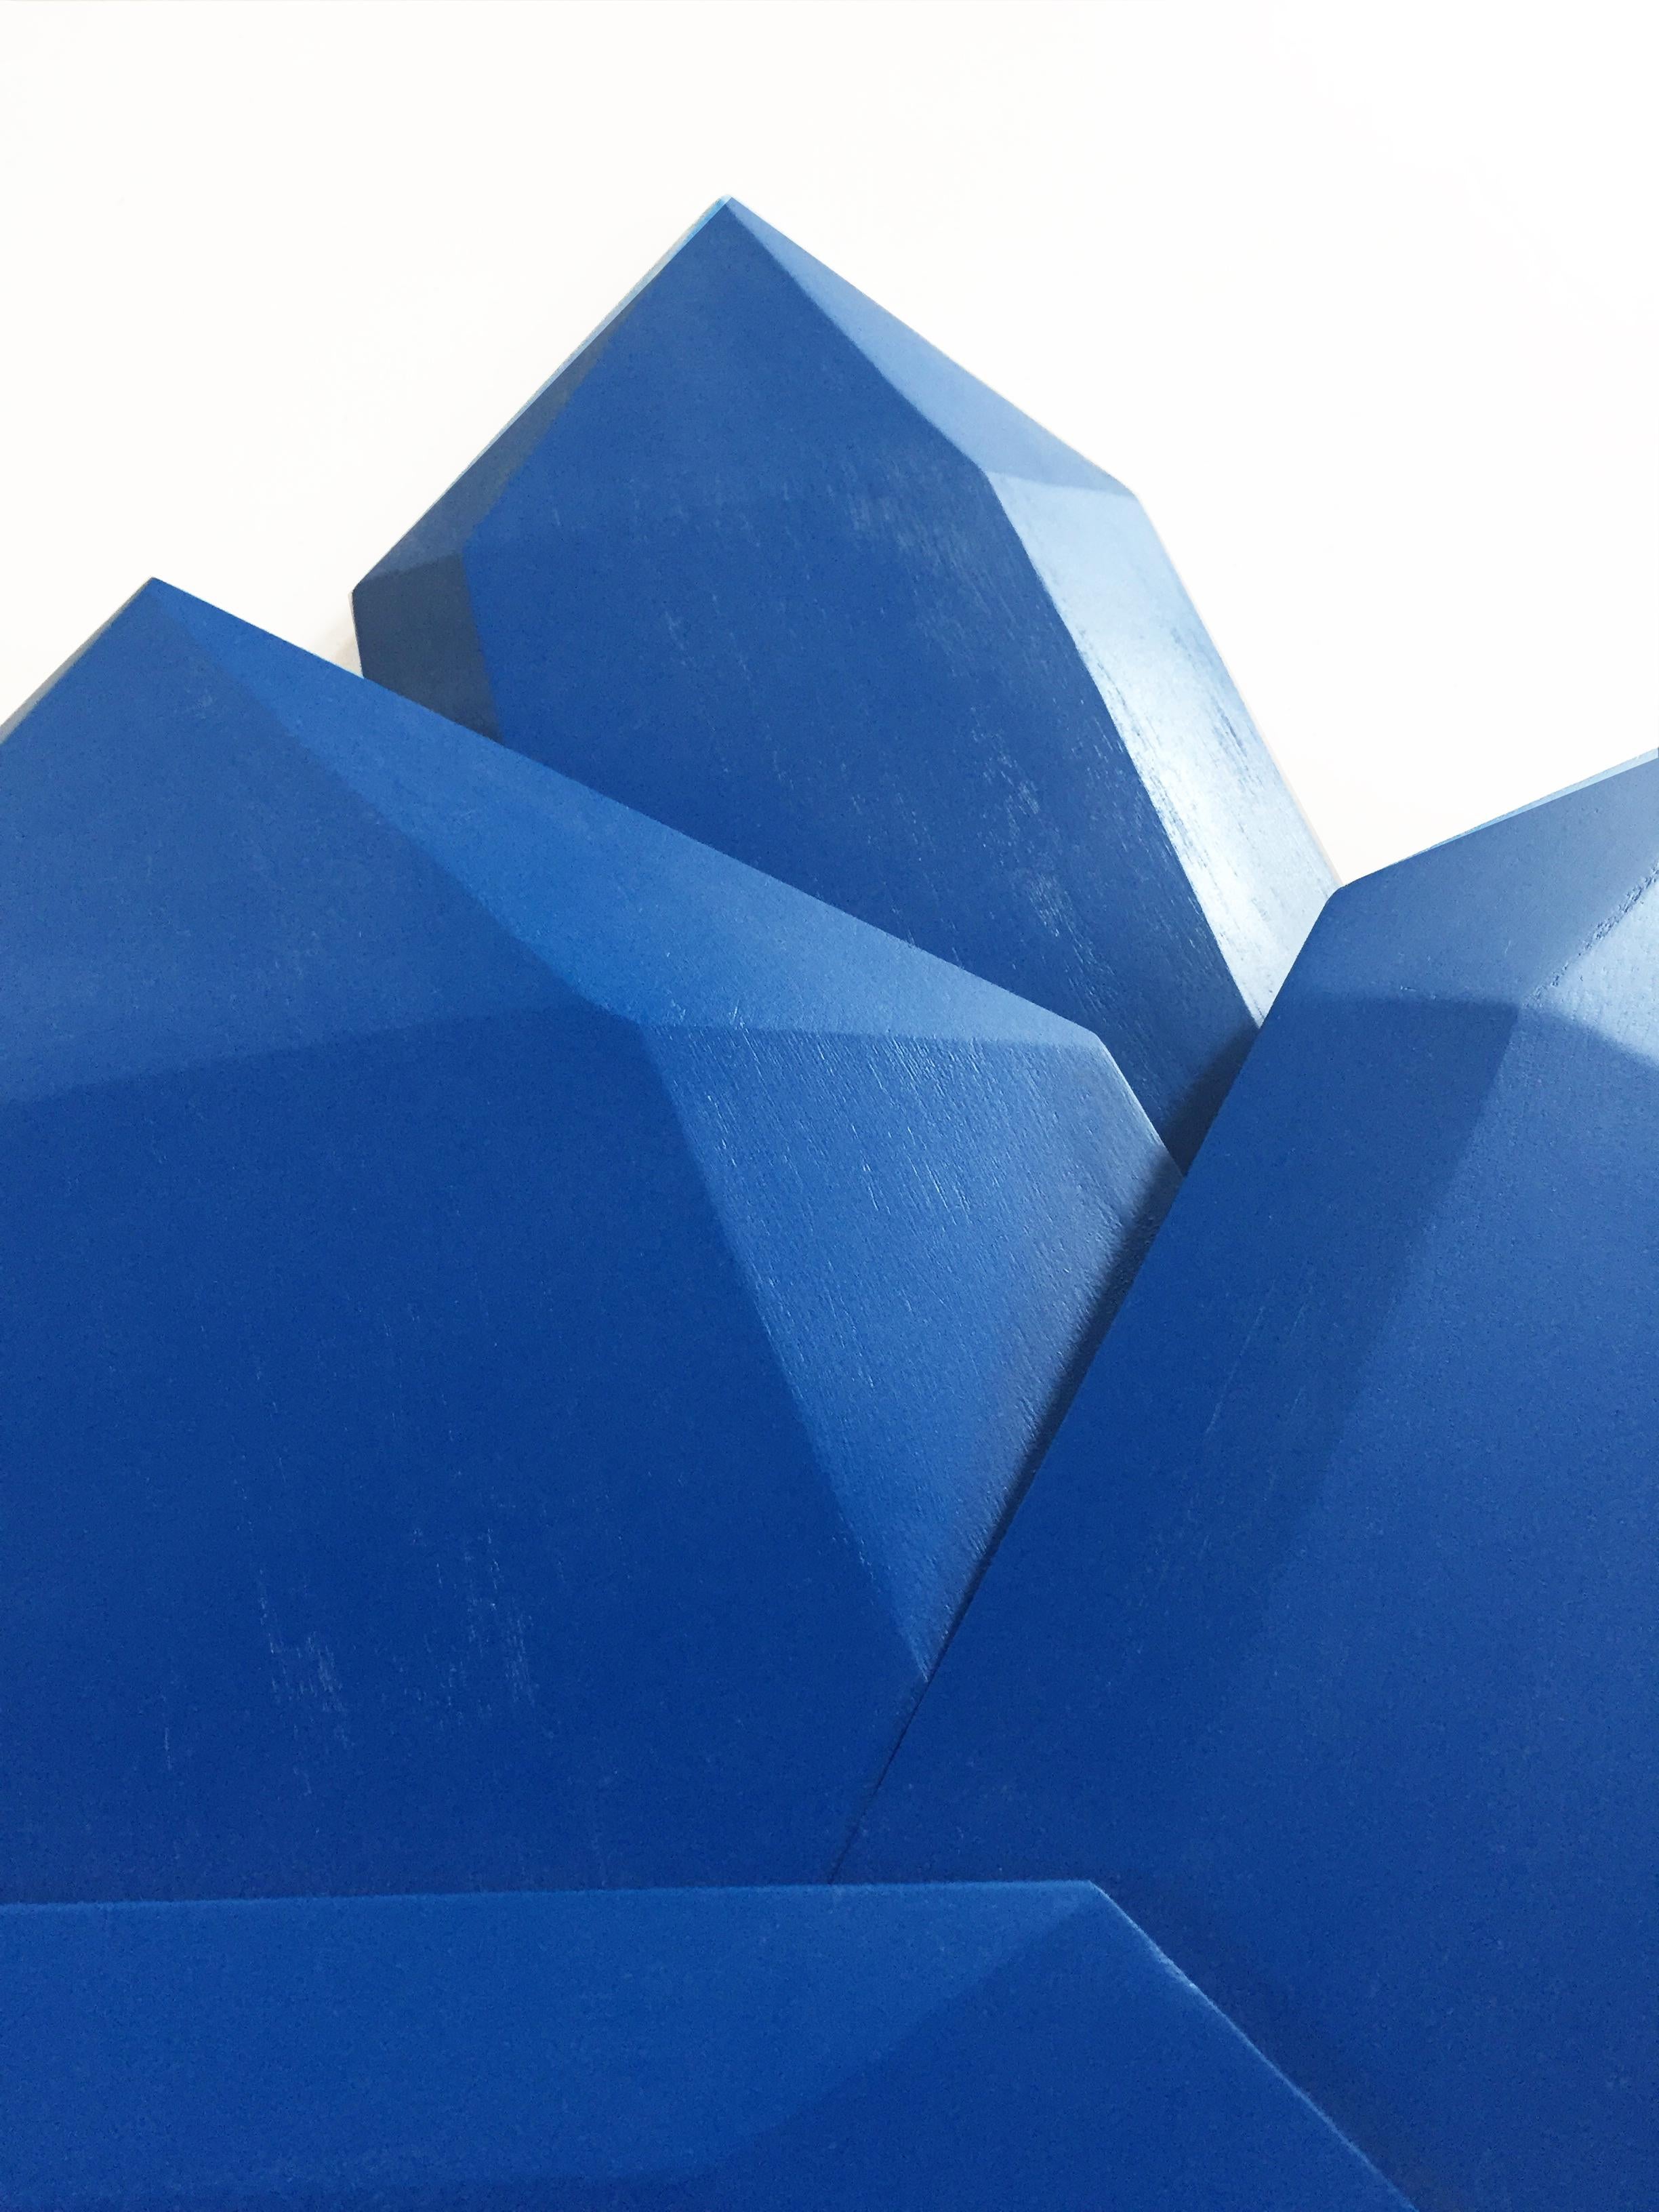 “True Blue Crystals” is a bright sapphire blue wall sculpture made out of solid wood and then painted and sealed with a UV matte sealer. The geometric facets are hand carved and add intricacy to the structure. This creates a dynamic artwork where